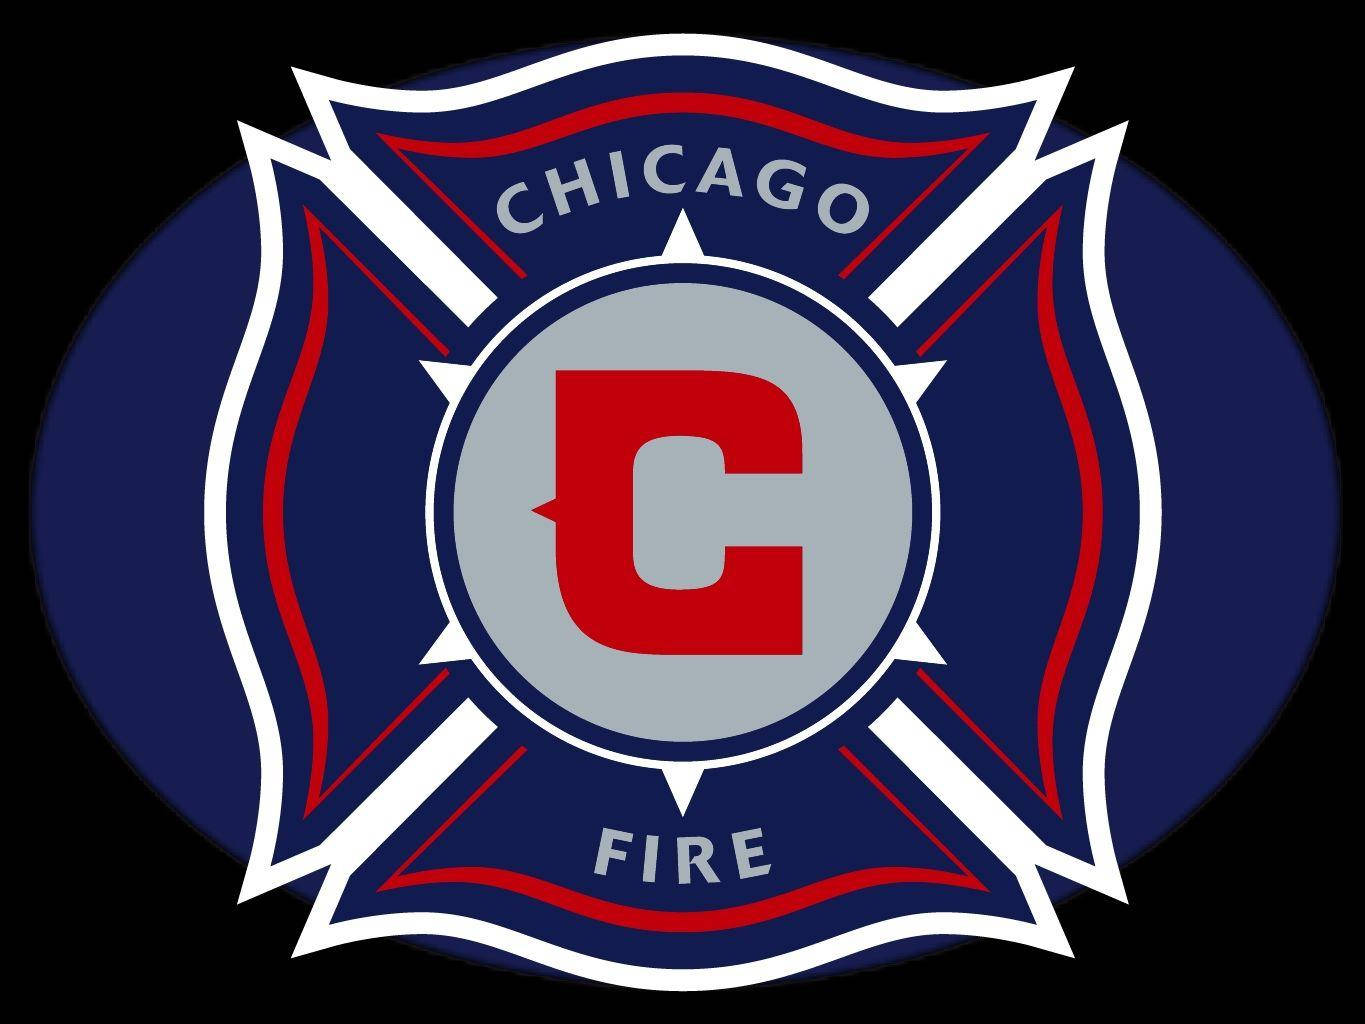 Chicago Fire Club Logo Picture